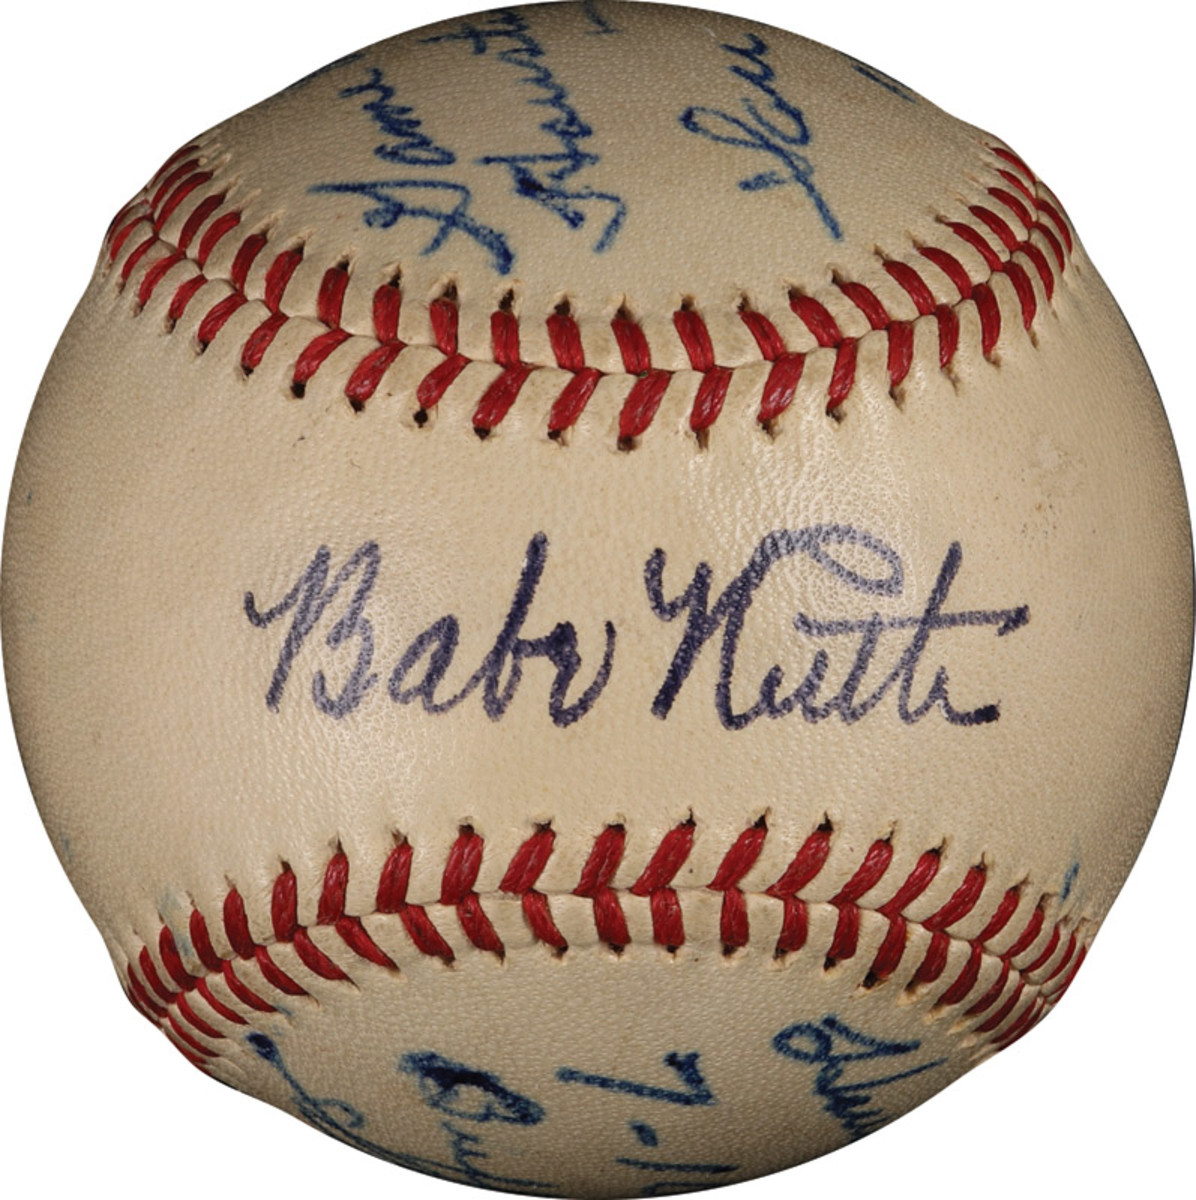 A Babe Ruth-signed ball autographed on "Babe Ruth Day" in Houston in 1947.